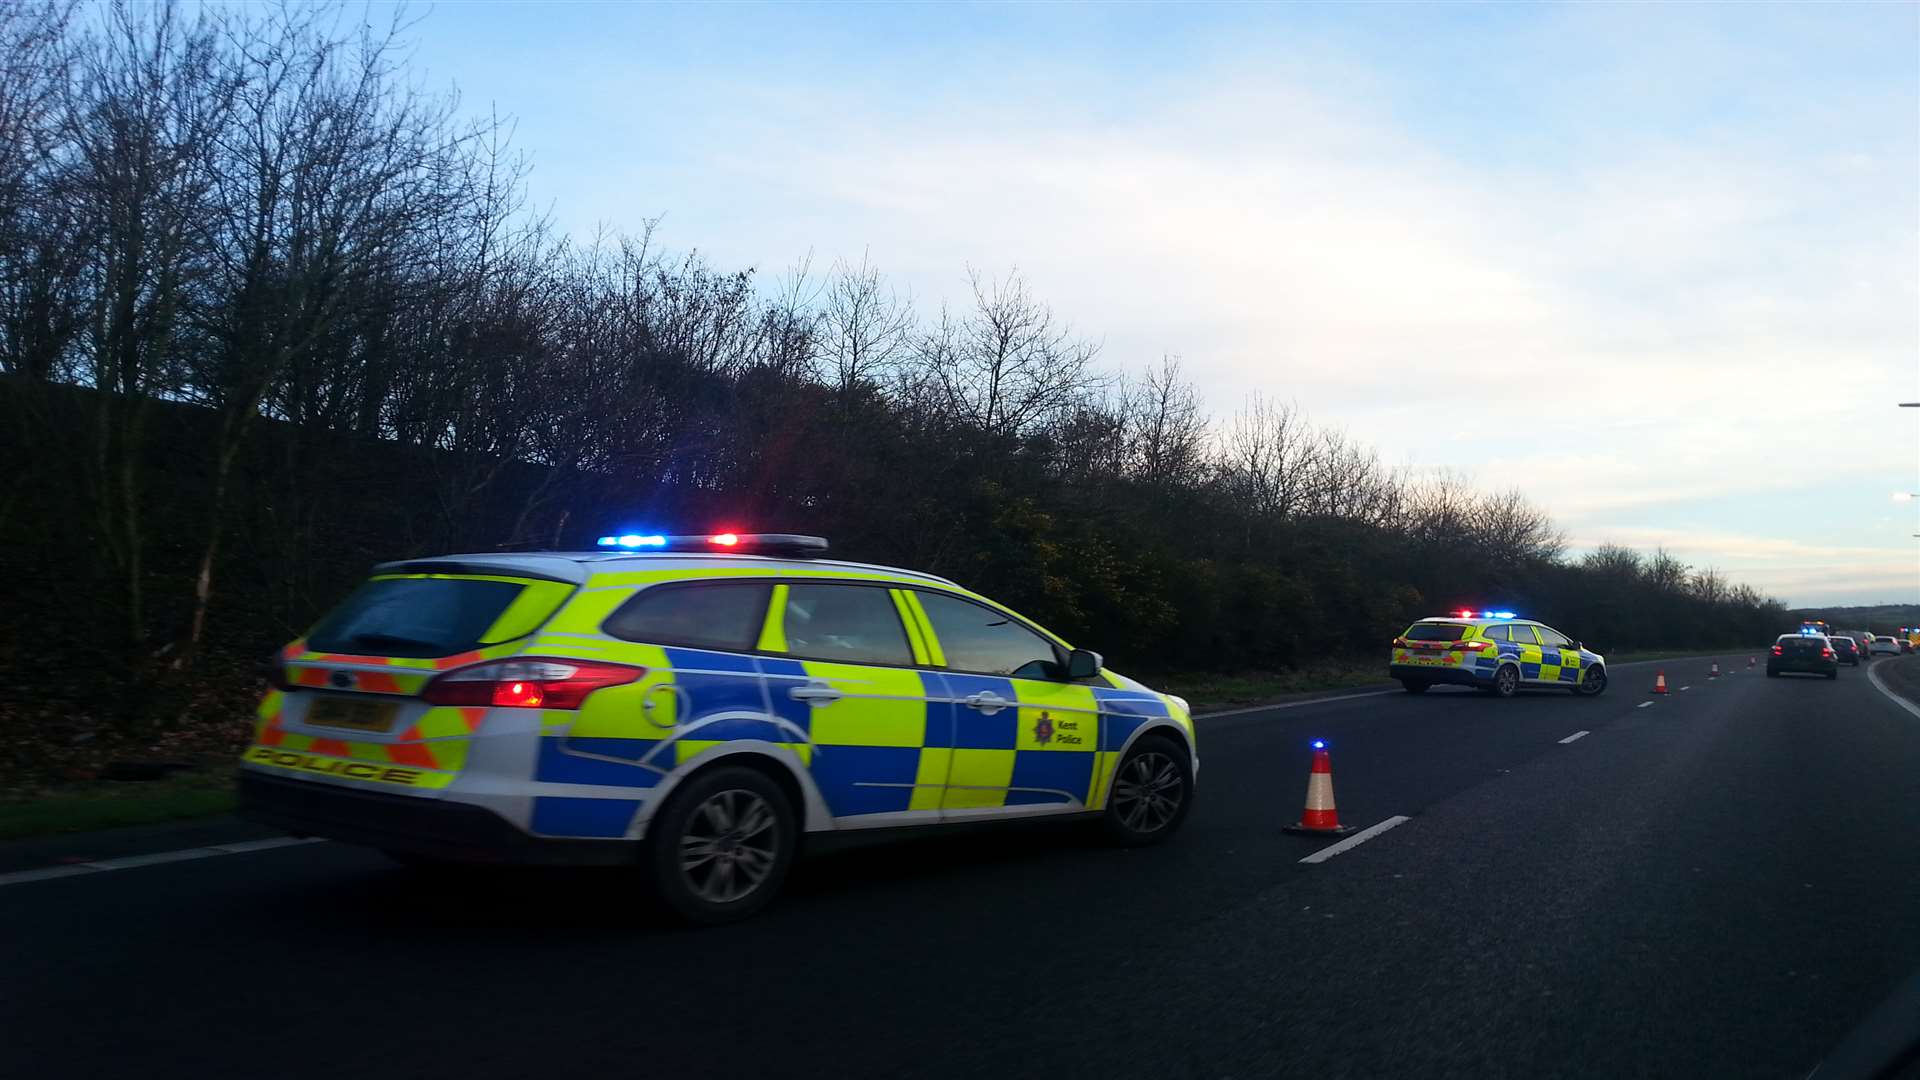 Police have closed one lane on the carriageway this morning